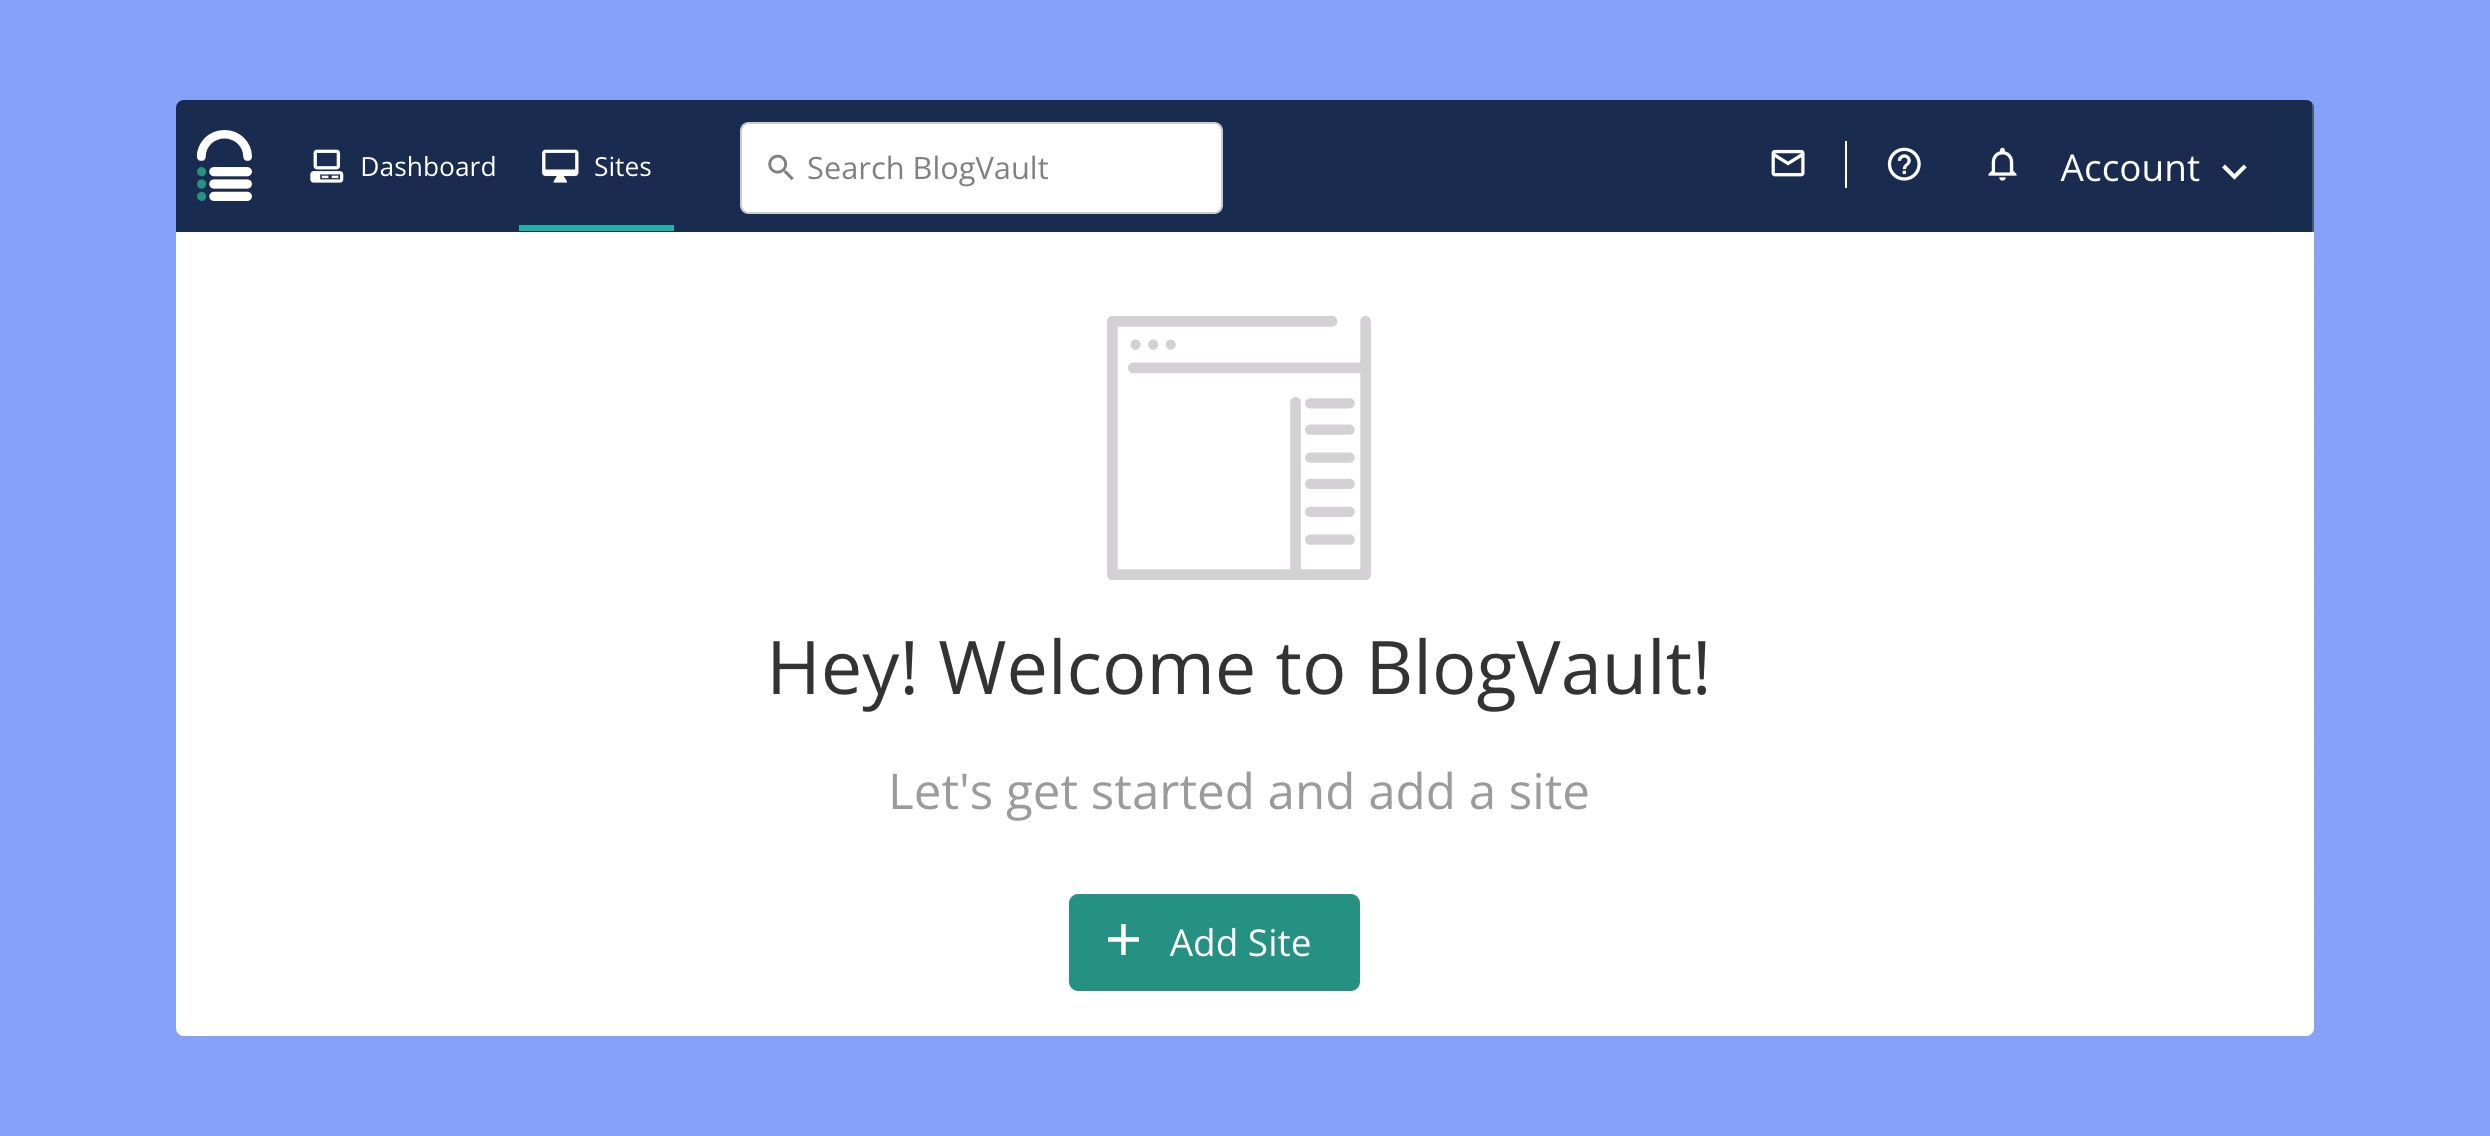 Add your website to BlogVault